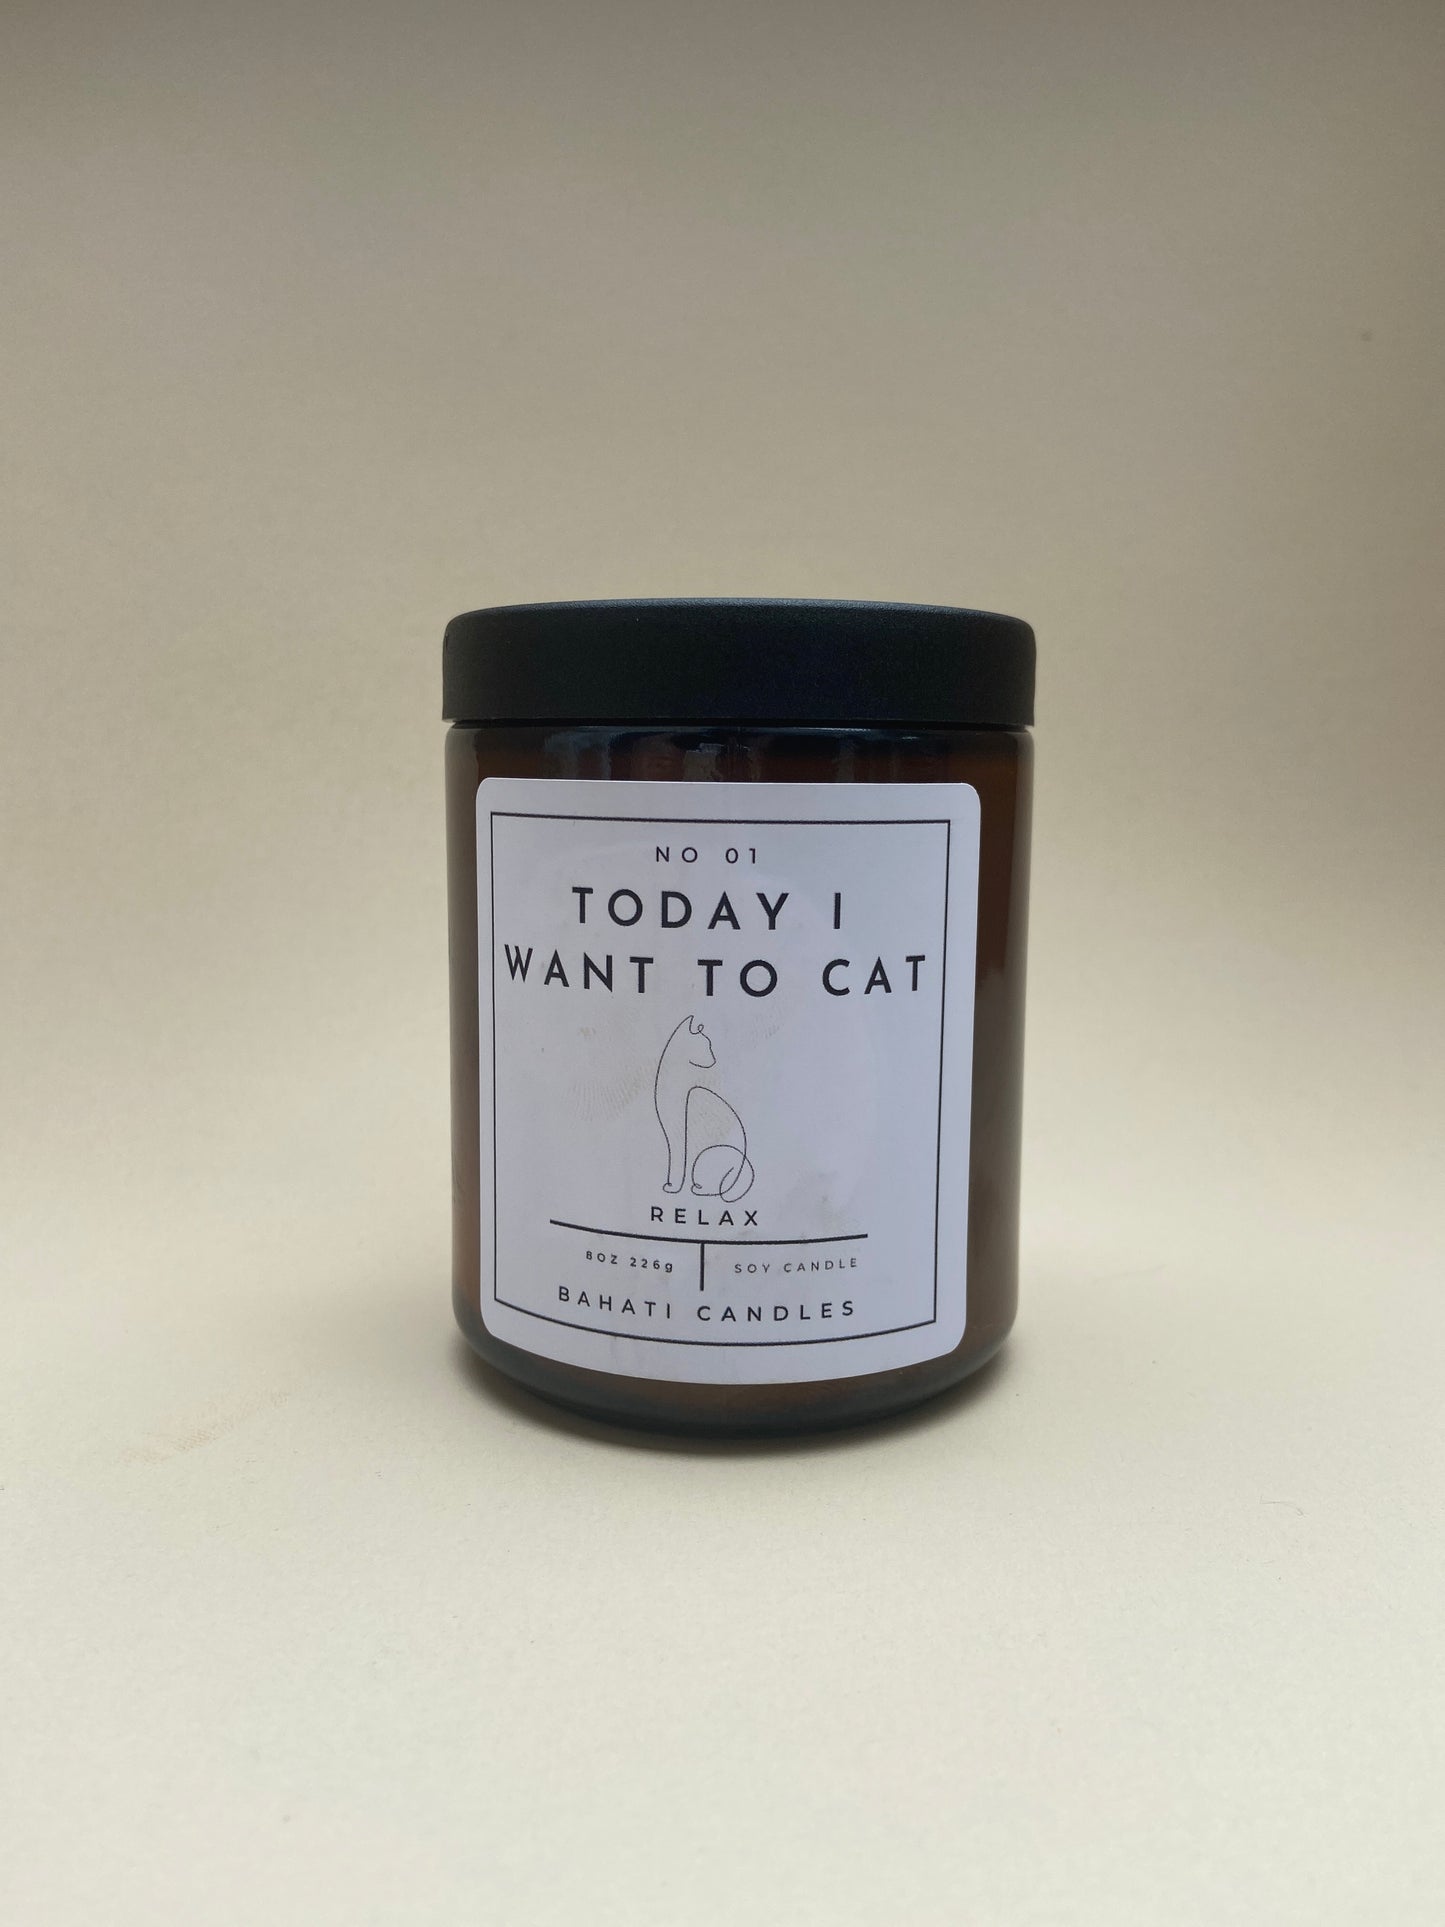 Today I want to cat - 8 ounce candle